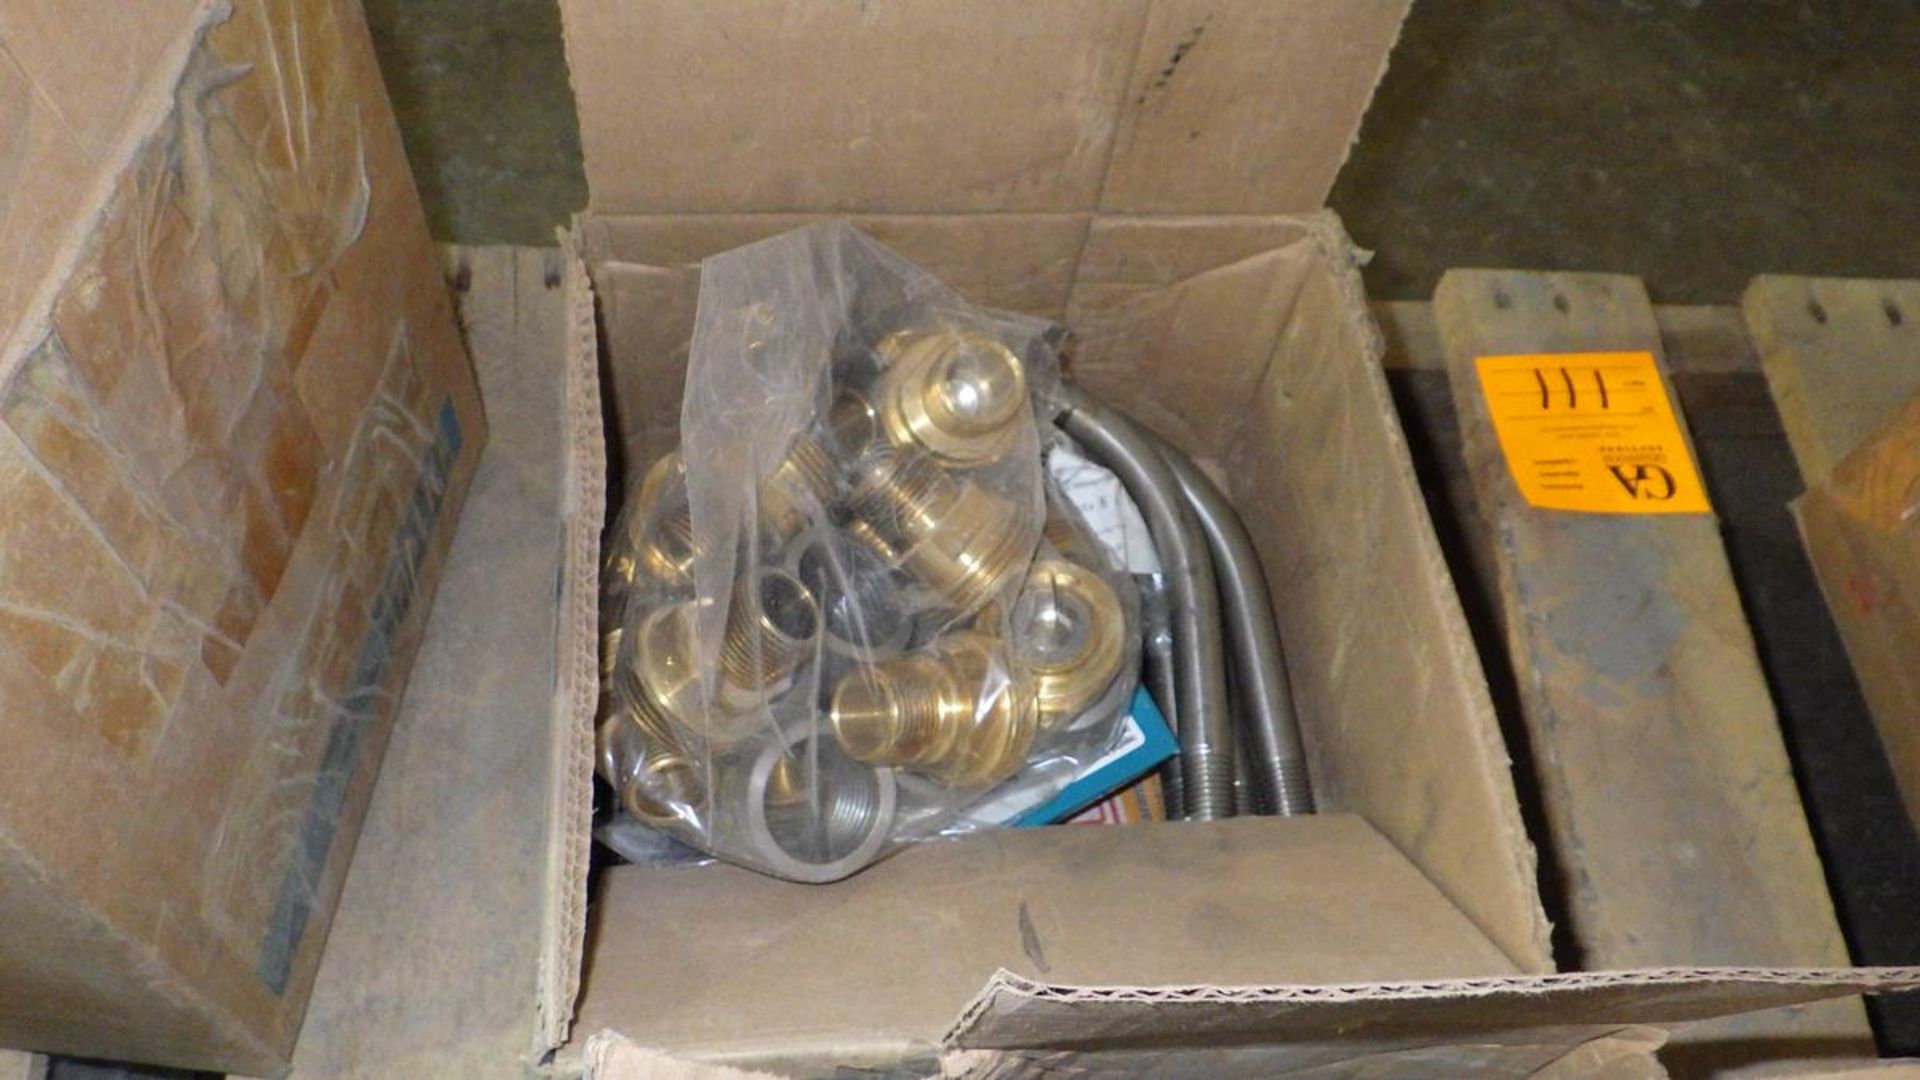 PALLET OF BOXES OF HYDRAULIC FITTINGS, RIGHT ANGLE GEAR DRIVE, CAM LOCKS, GRADER BLADE BOLTS. - Image 9 of 10